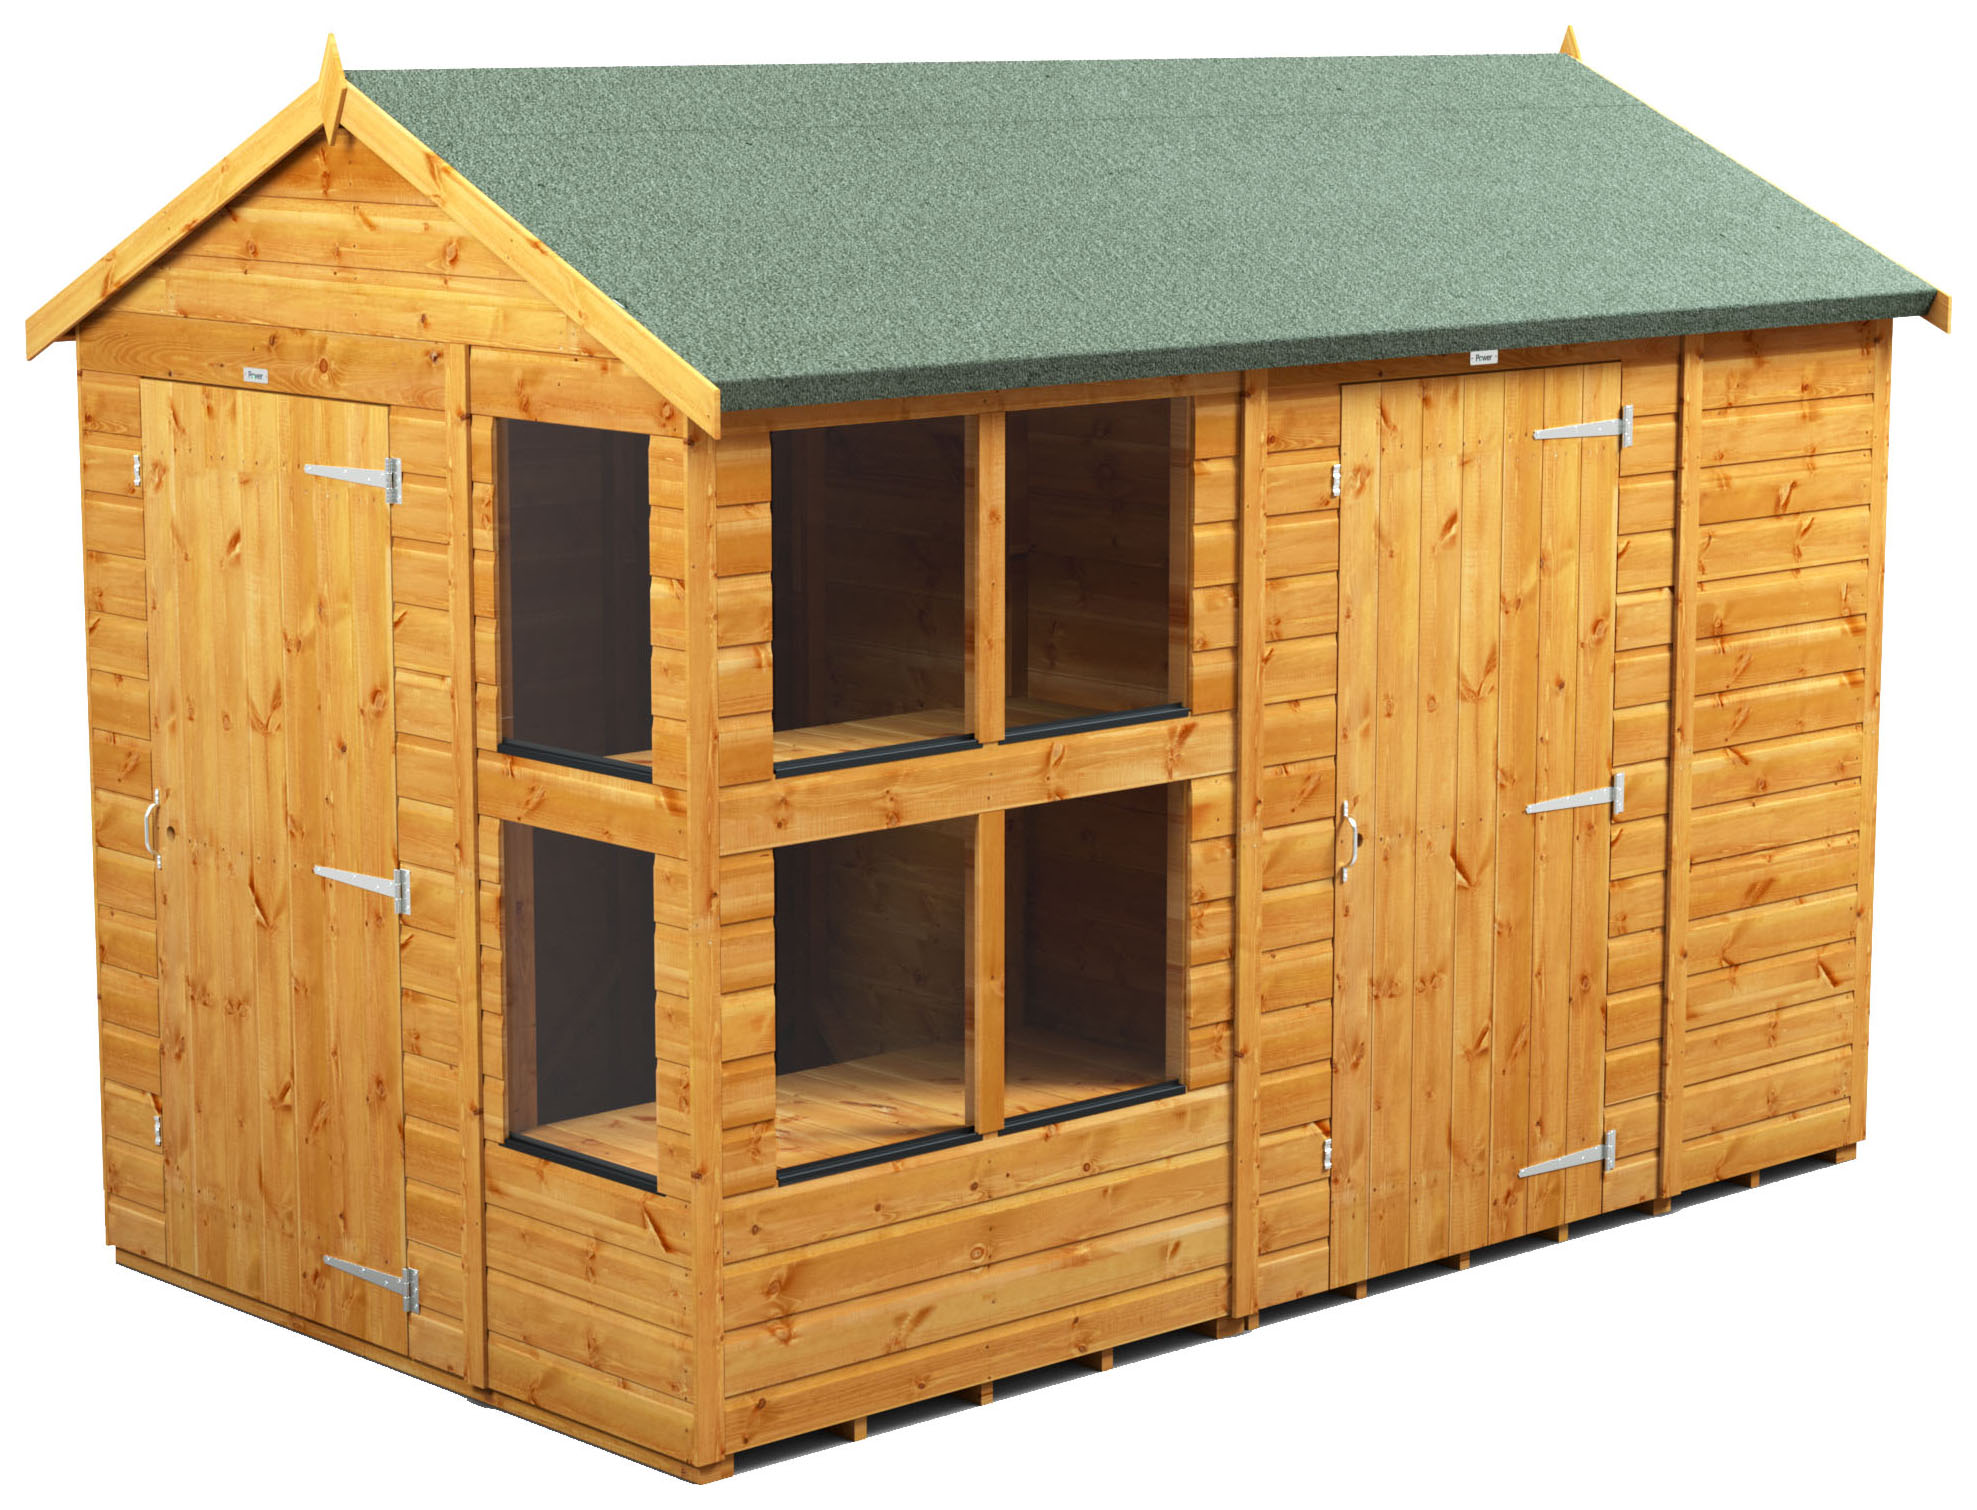 Power Sheds 10 x 6ft Apex Shiplap Dip Treated Potting Shed - Including Side Store